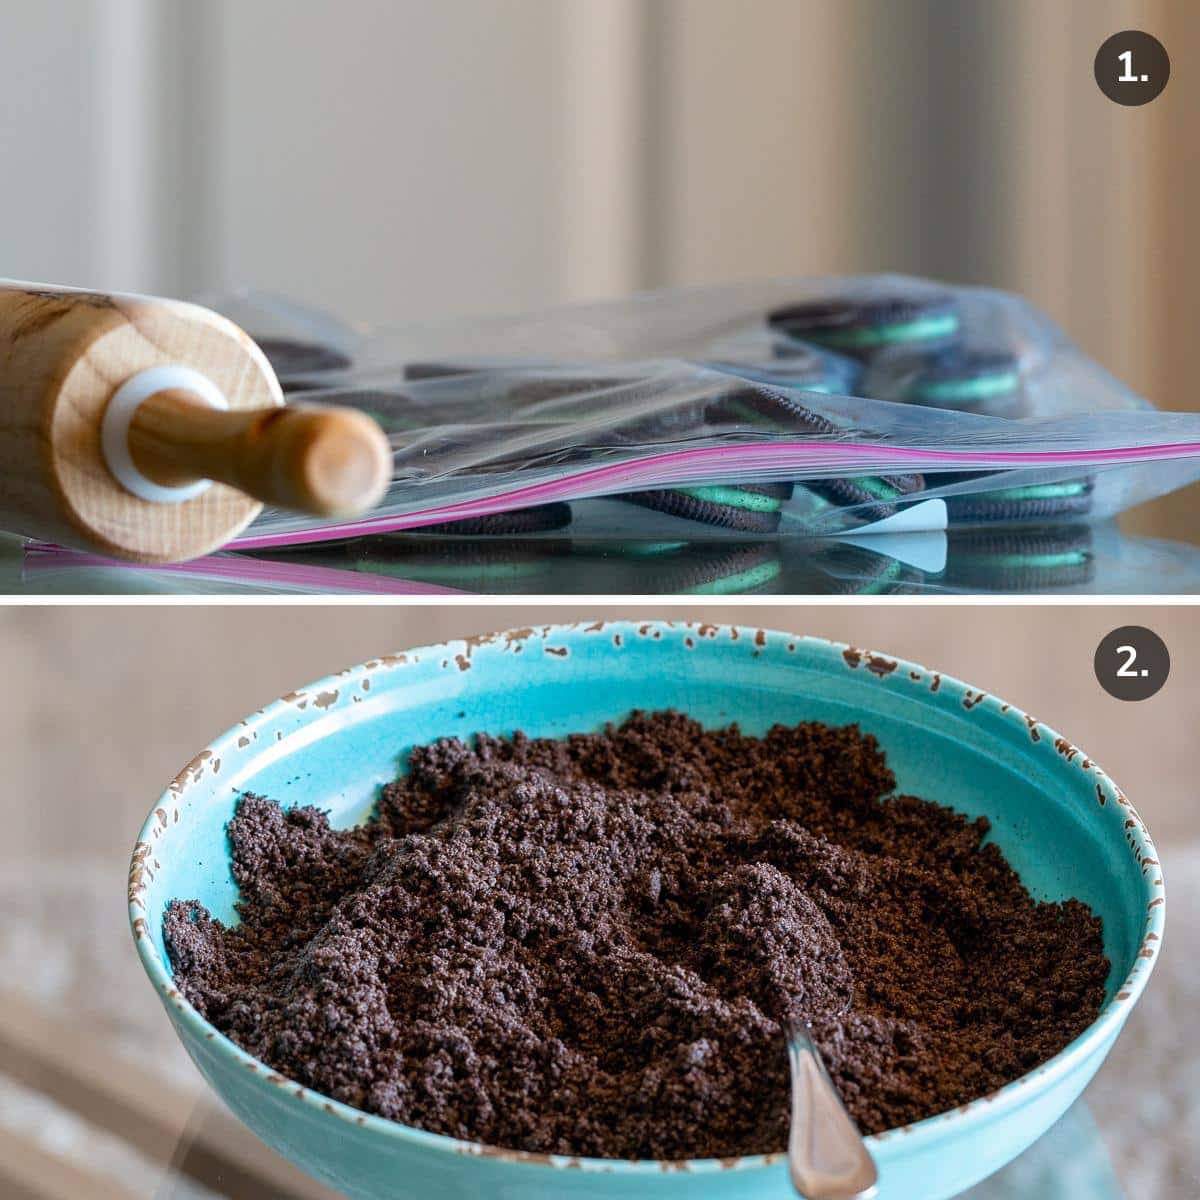 Crushing Oreo cookies with a rolling pin and a bowl of the crushed mint Oreo cookies. 